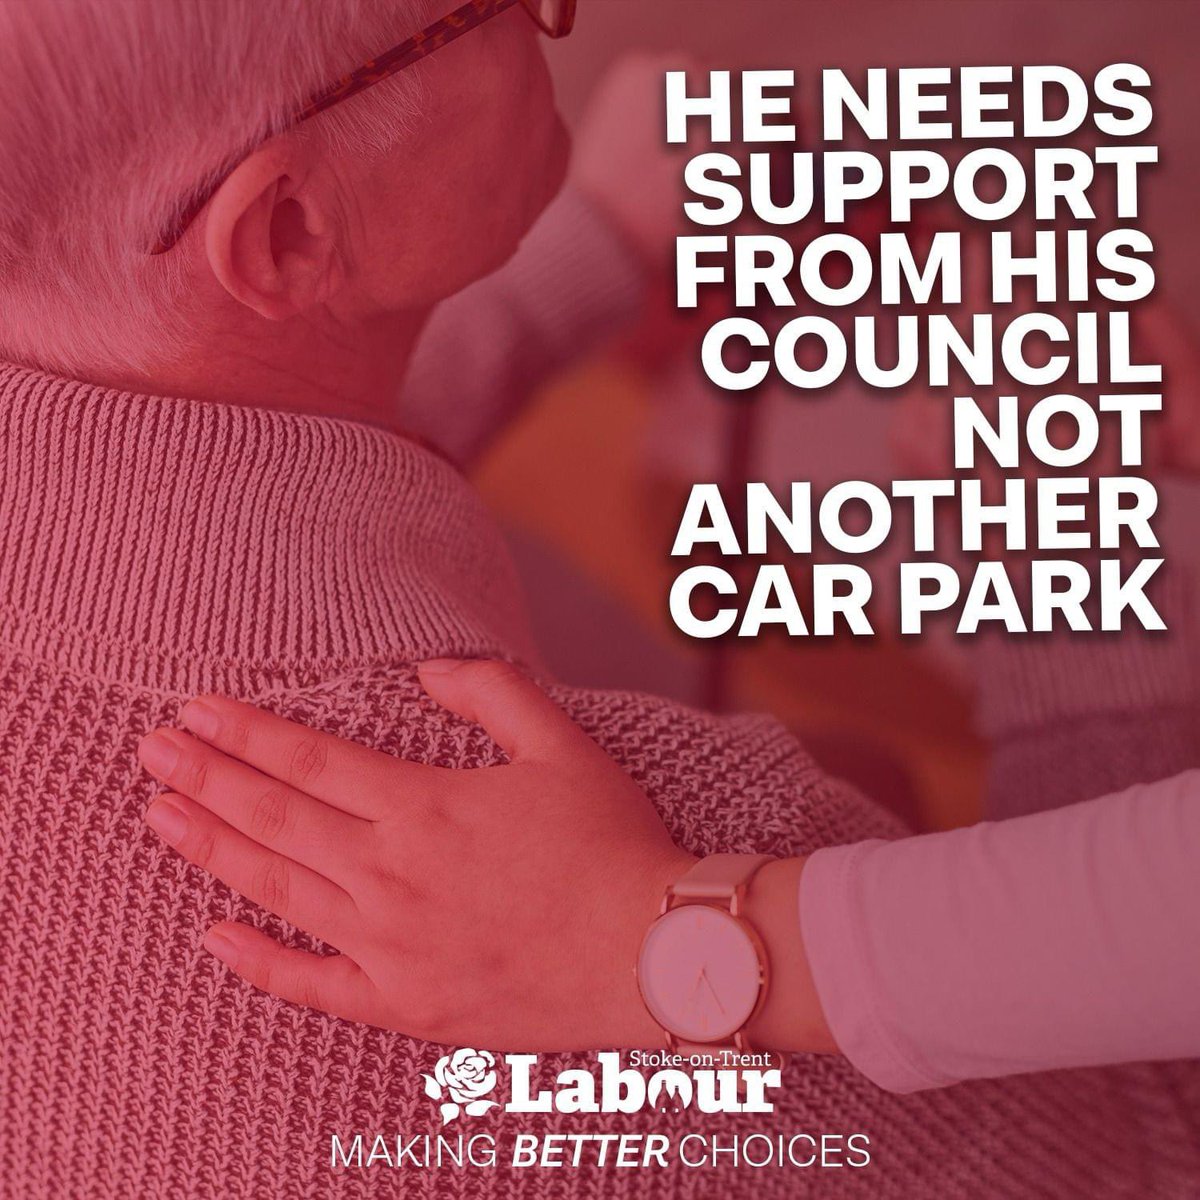 After the Conservatives raided the Council coffers to build car parks and vanity projects, Labour's making the sensible decisions to protect our City, our residents and our services.